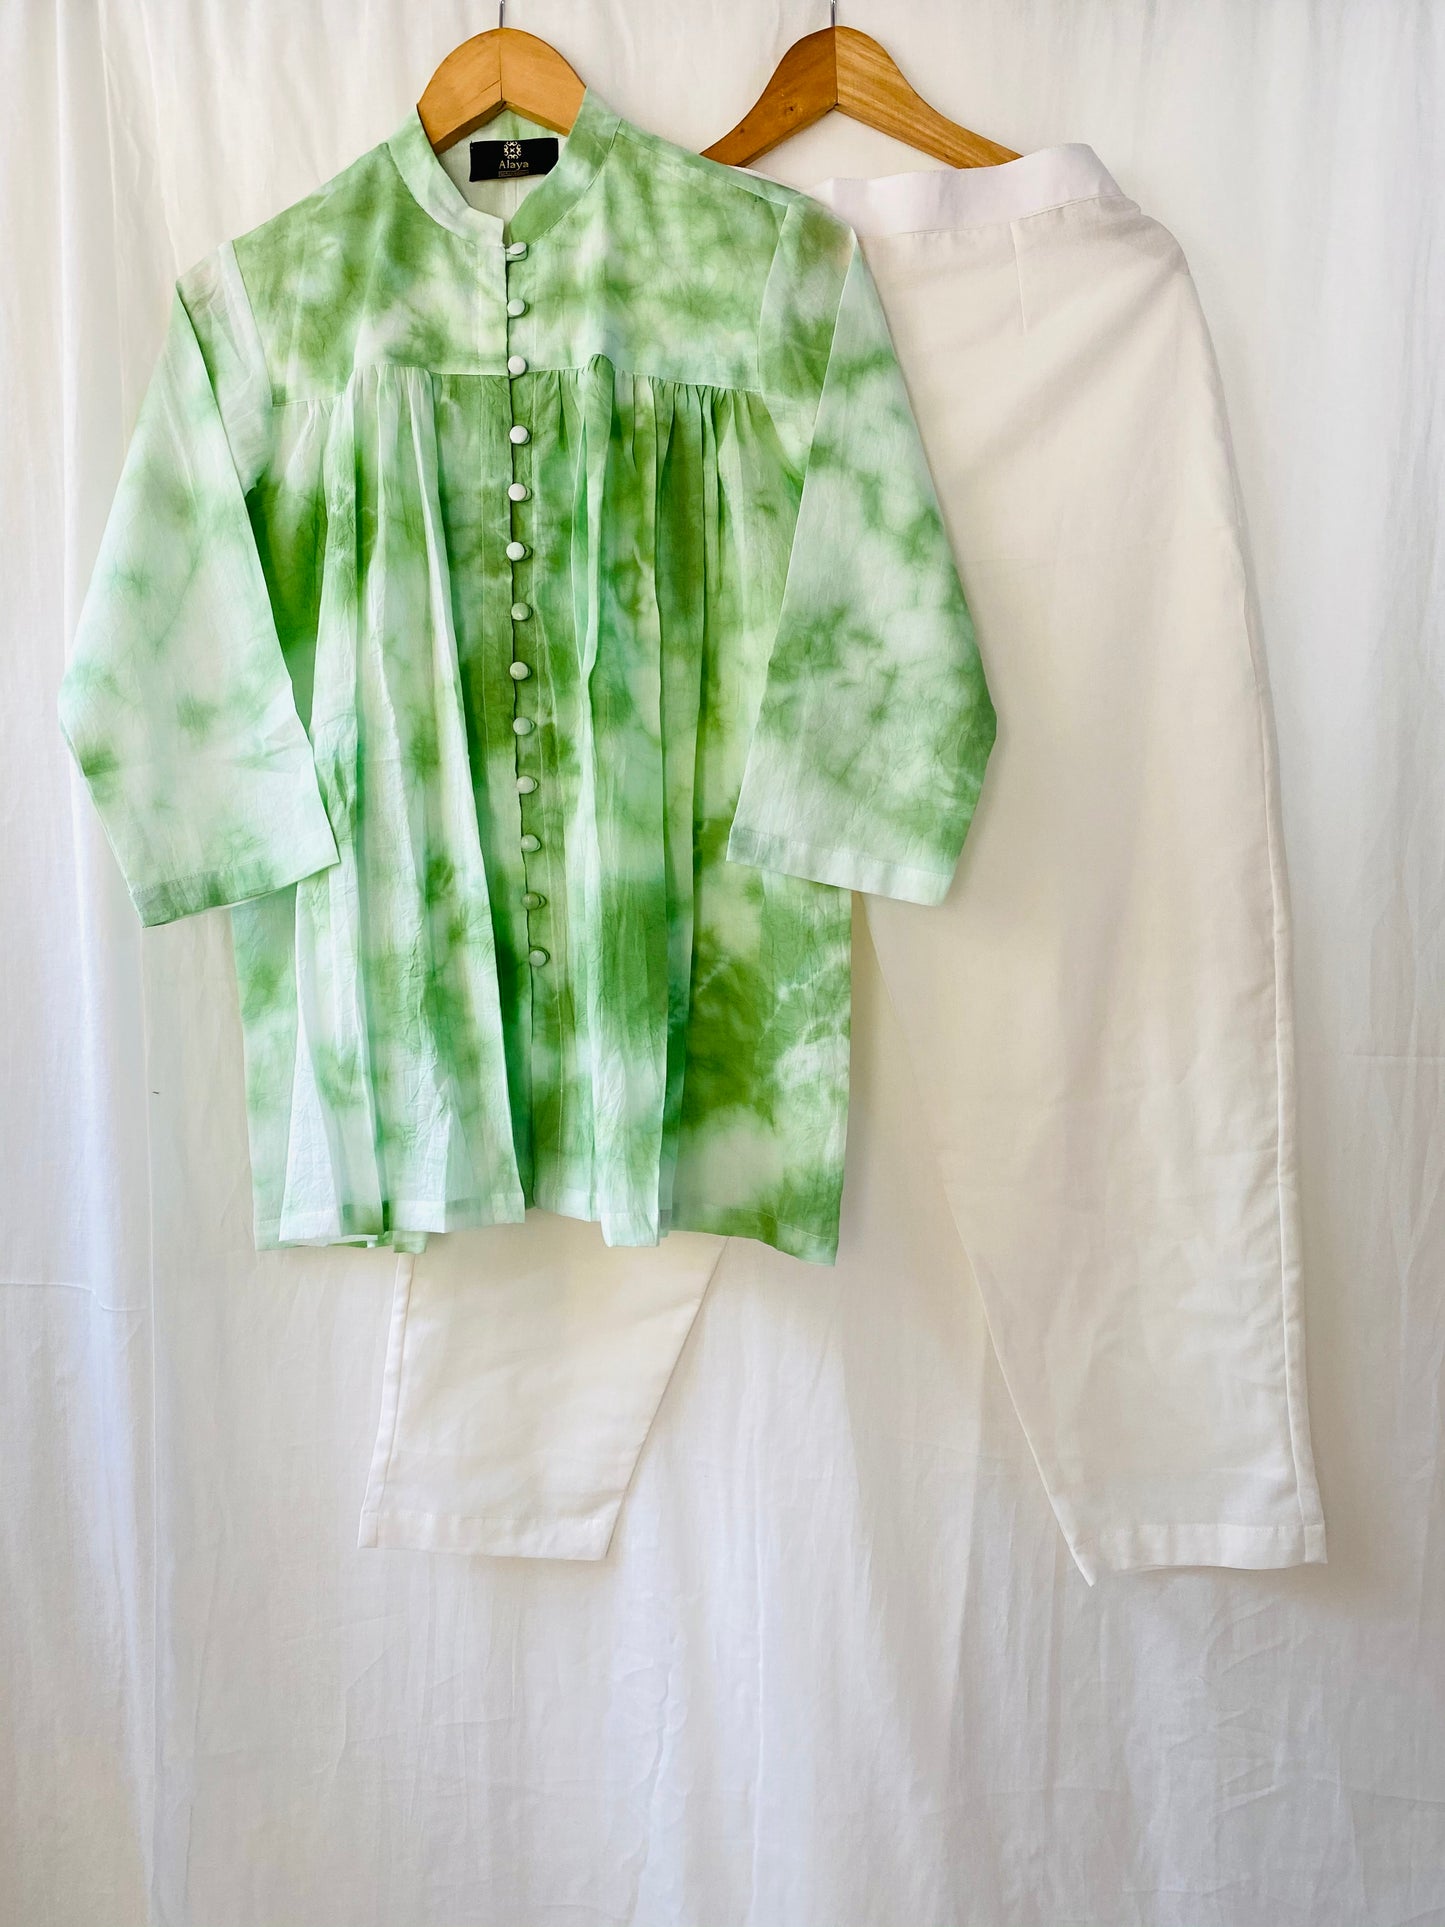 Green Tie Dye Top with solid White Pants